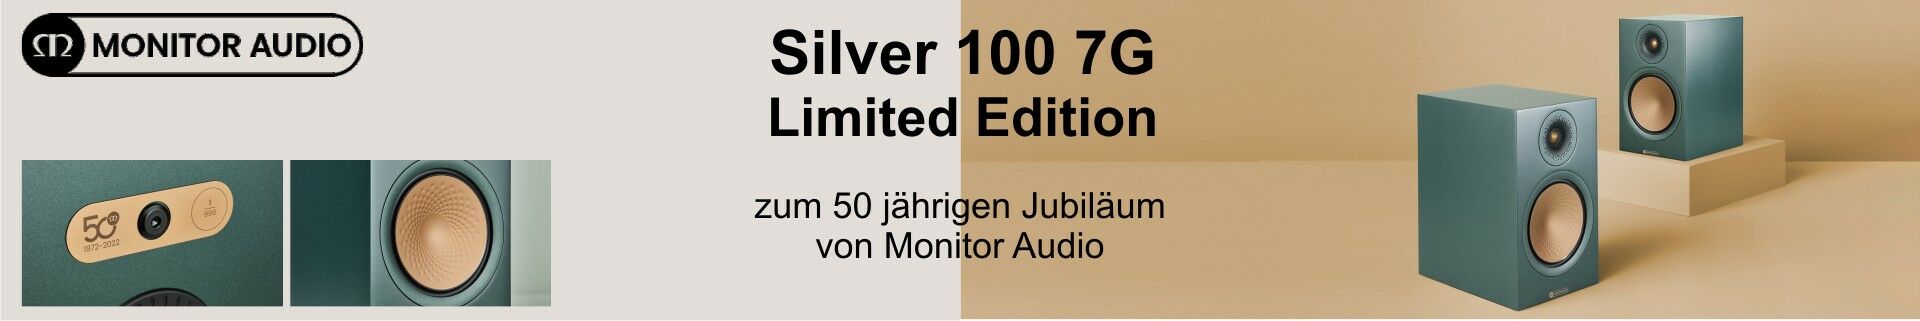 Monitor Audio Silver 100 7G Limited Edition in Heritage...